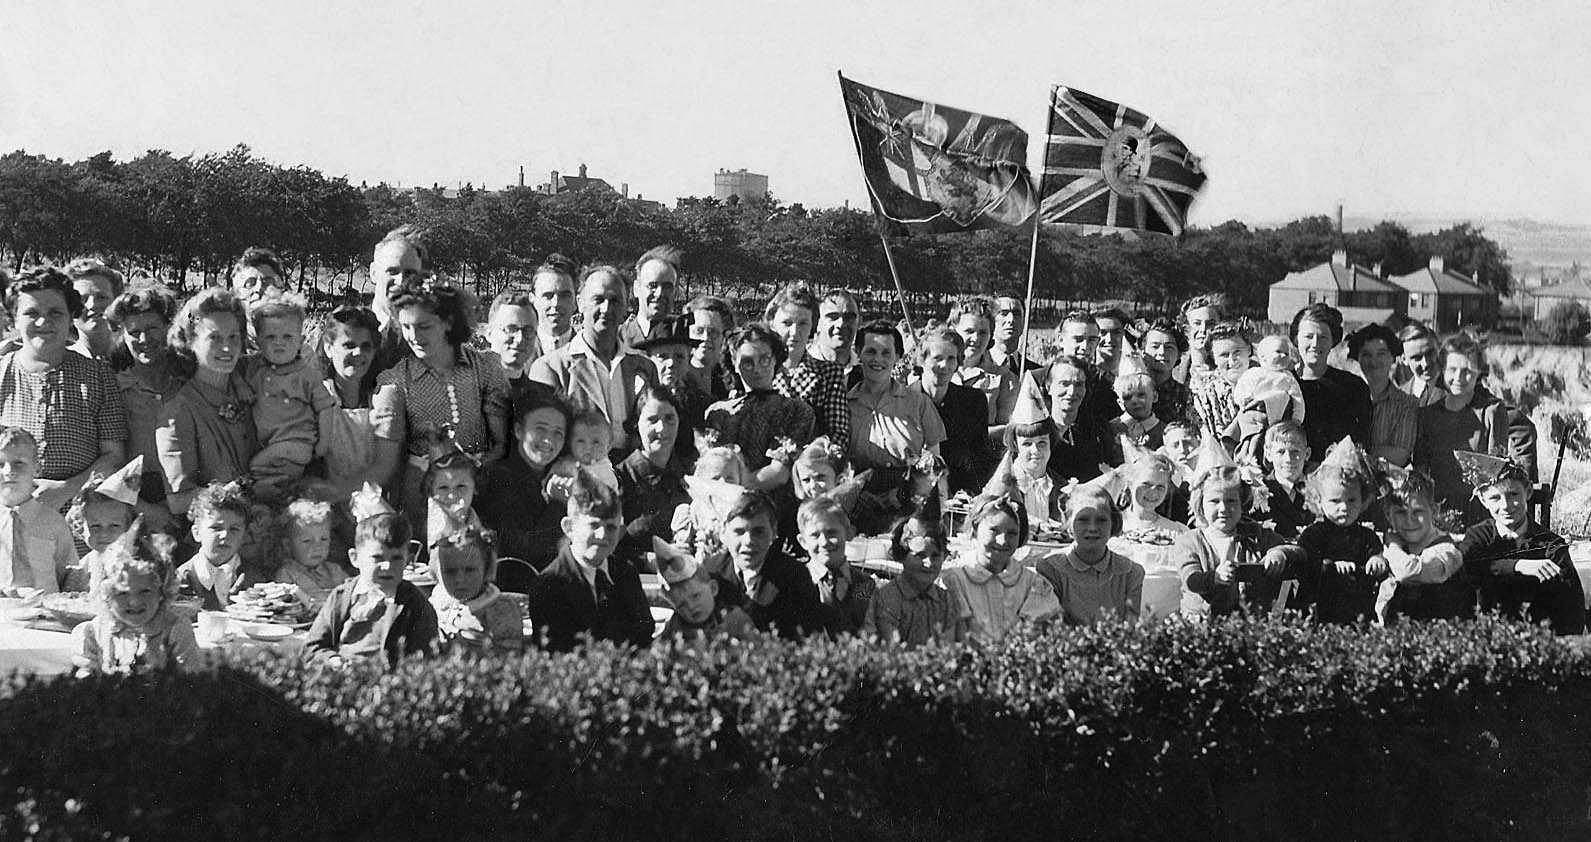 Irwin Road Street Party - contributed by John Barton